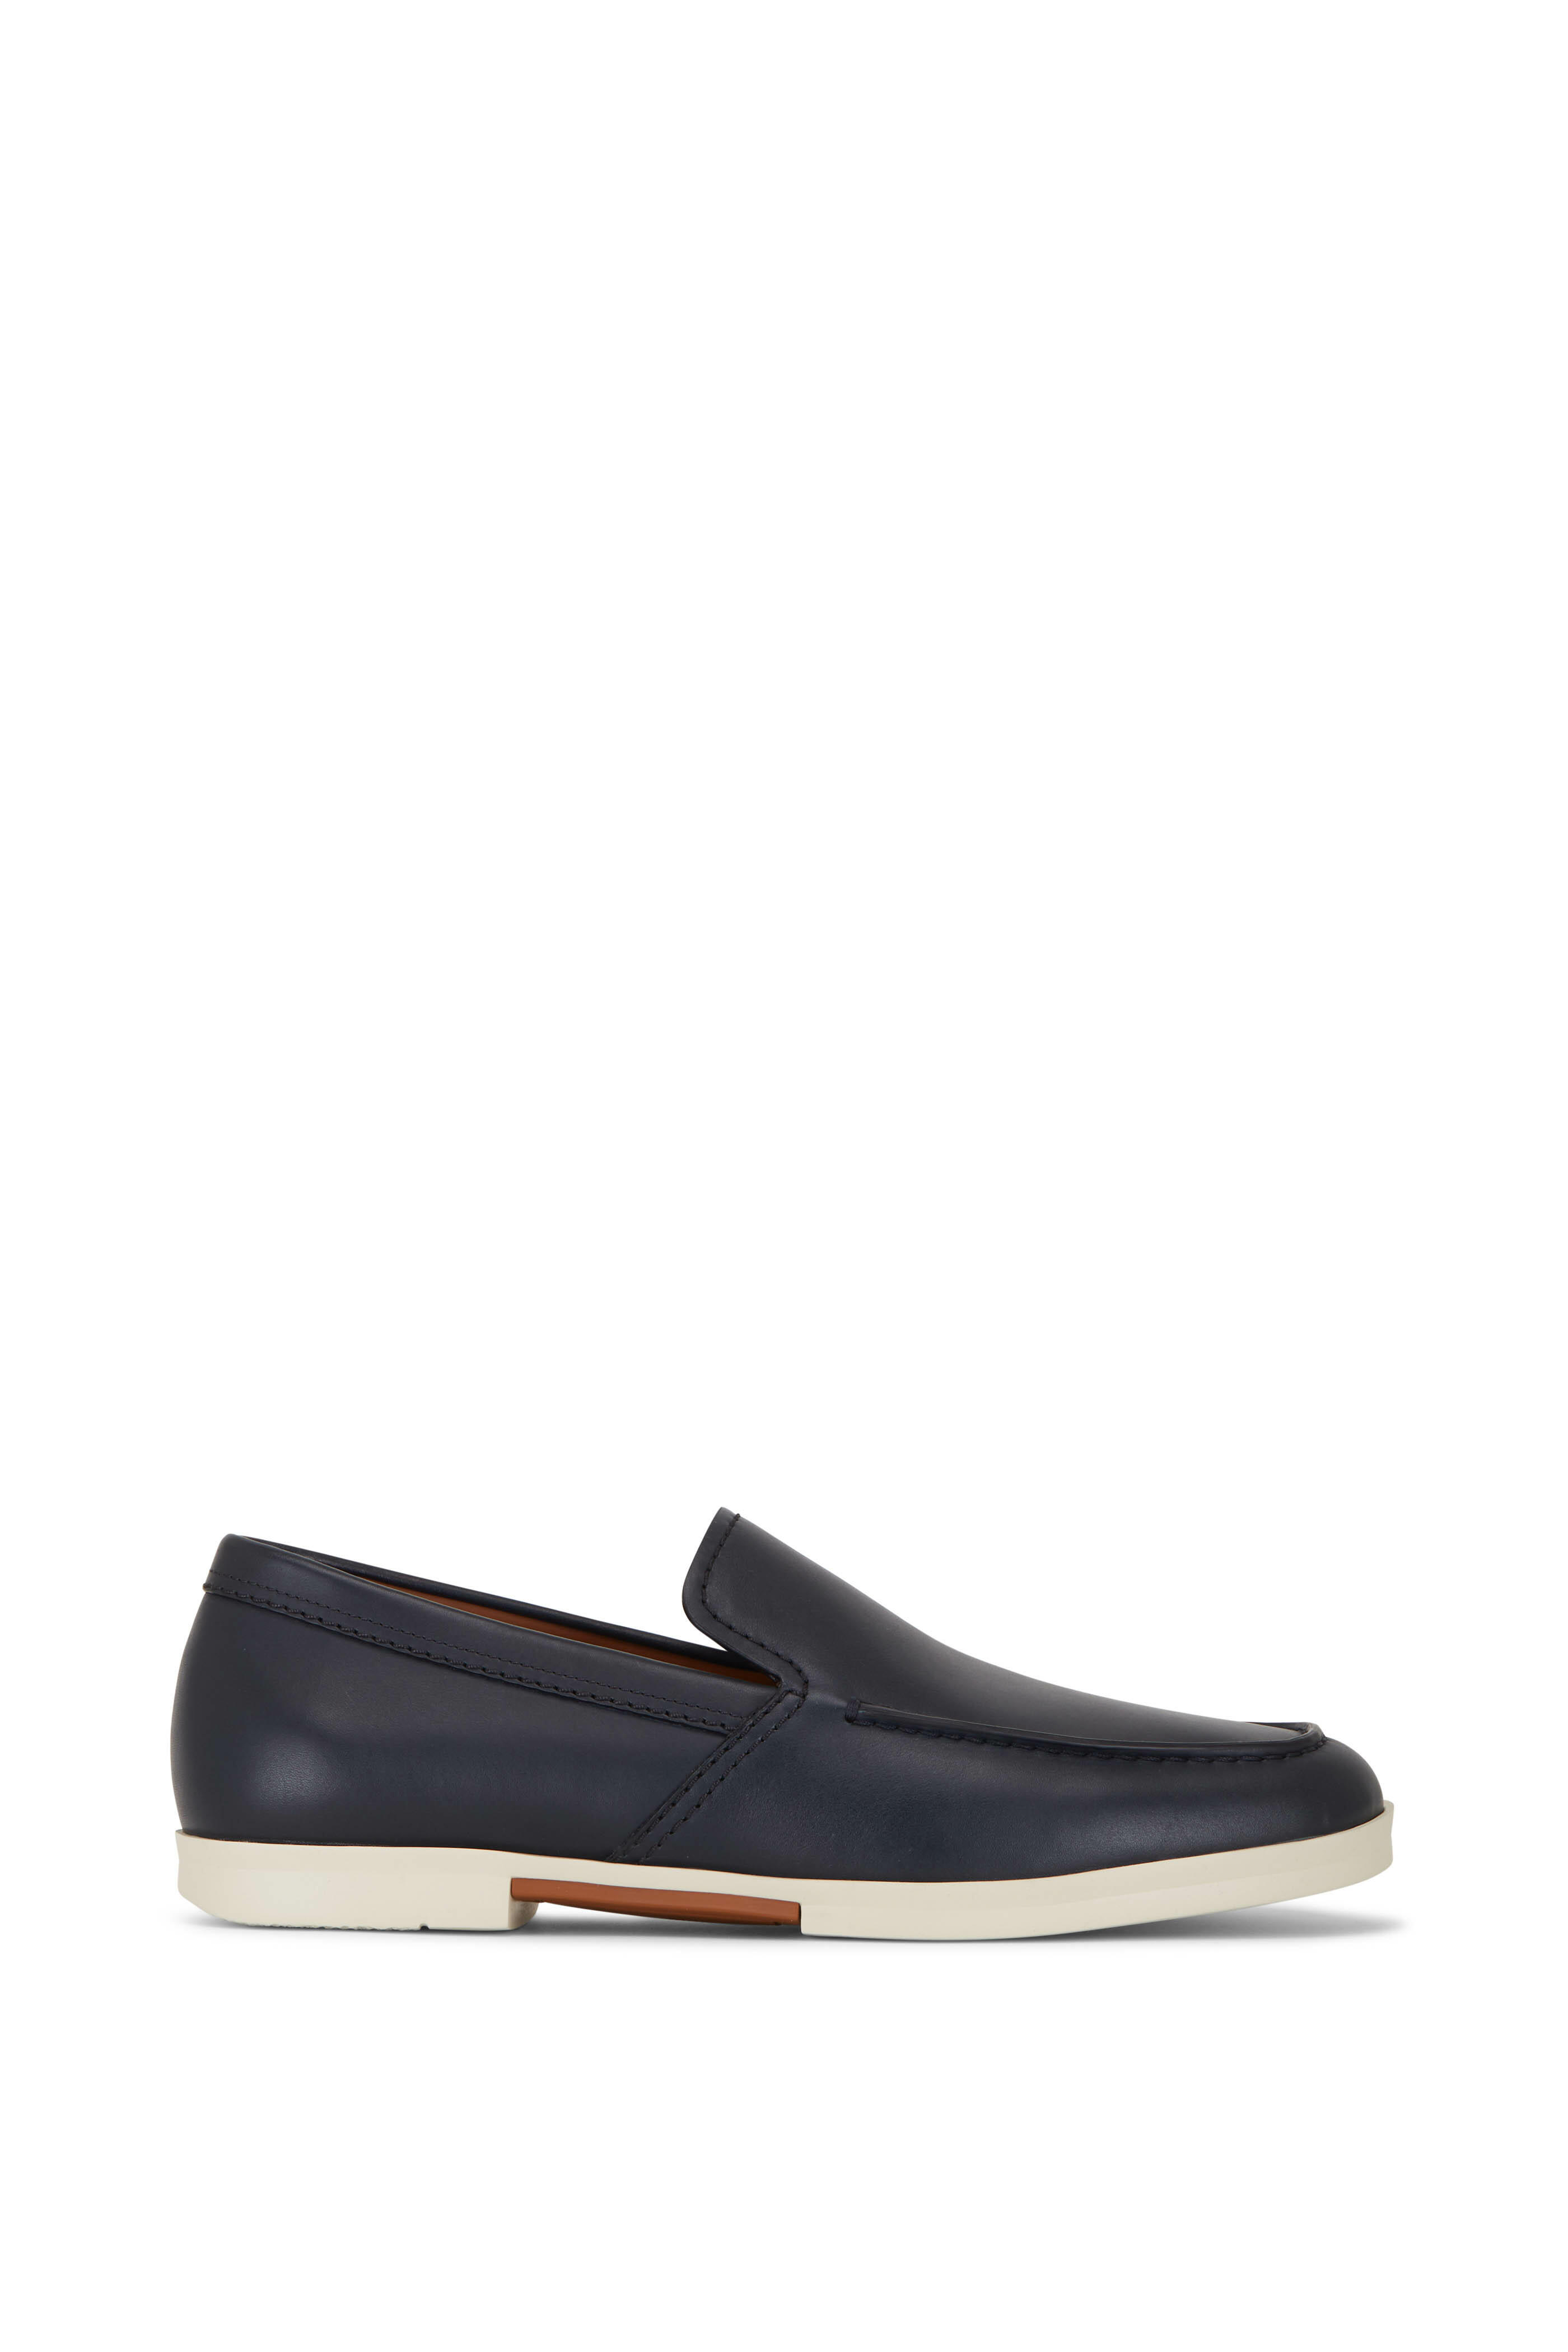 Zegna - Navy Blue Leather Loafer | Mitchell Stores